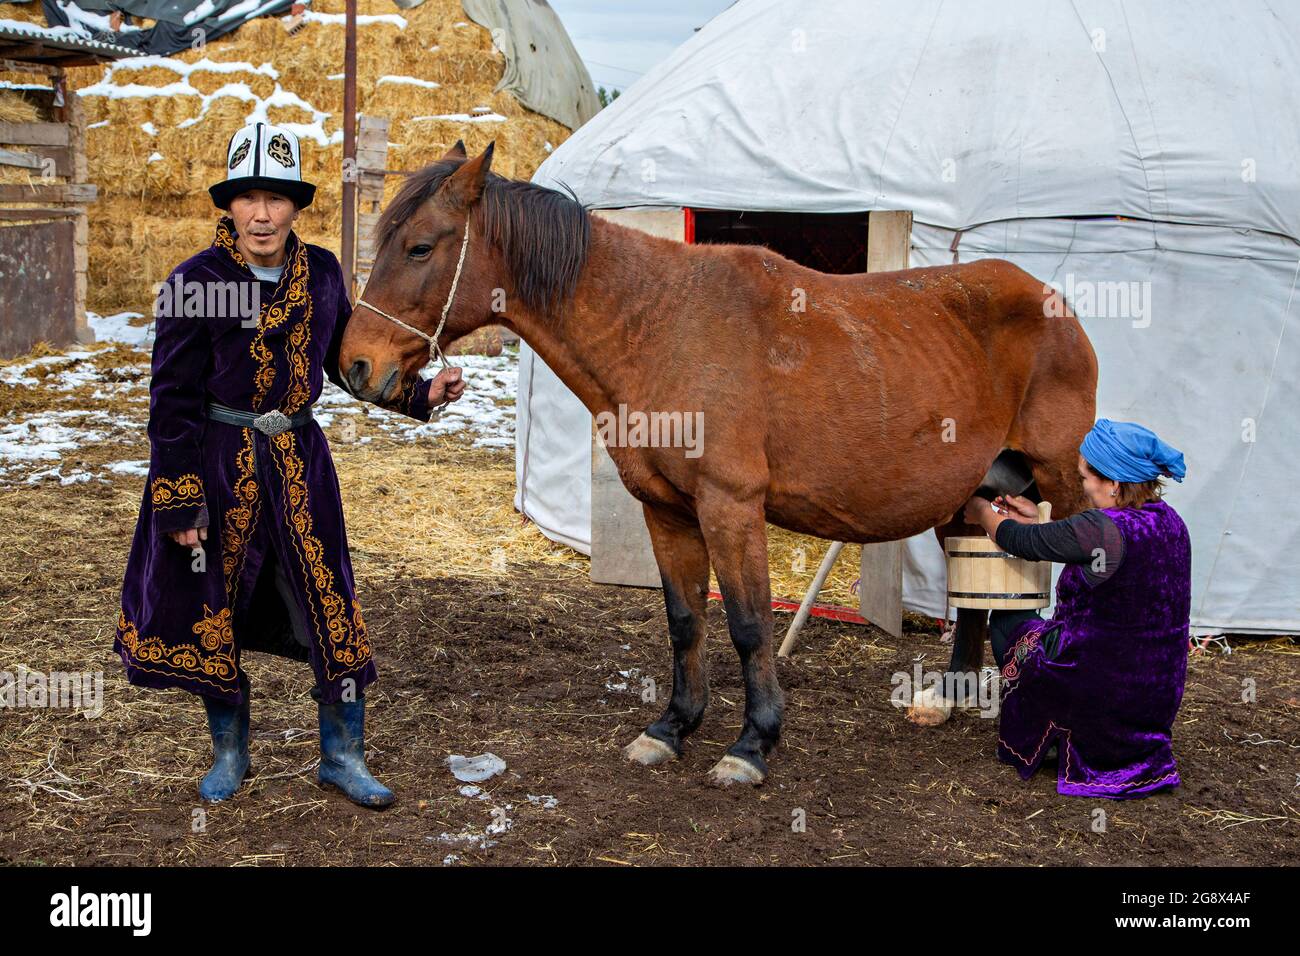 Nomadic man holding the horse and nomadic woman milking it to make local traditional drink known as Kymyz, in Bishkek, Kyrgyzstan. Stock Photo